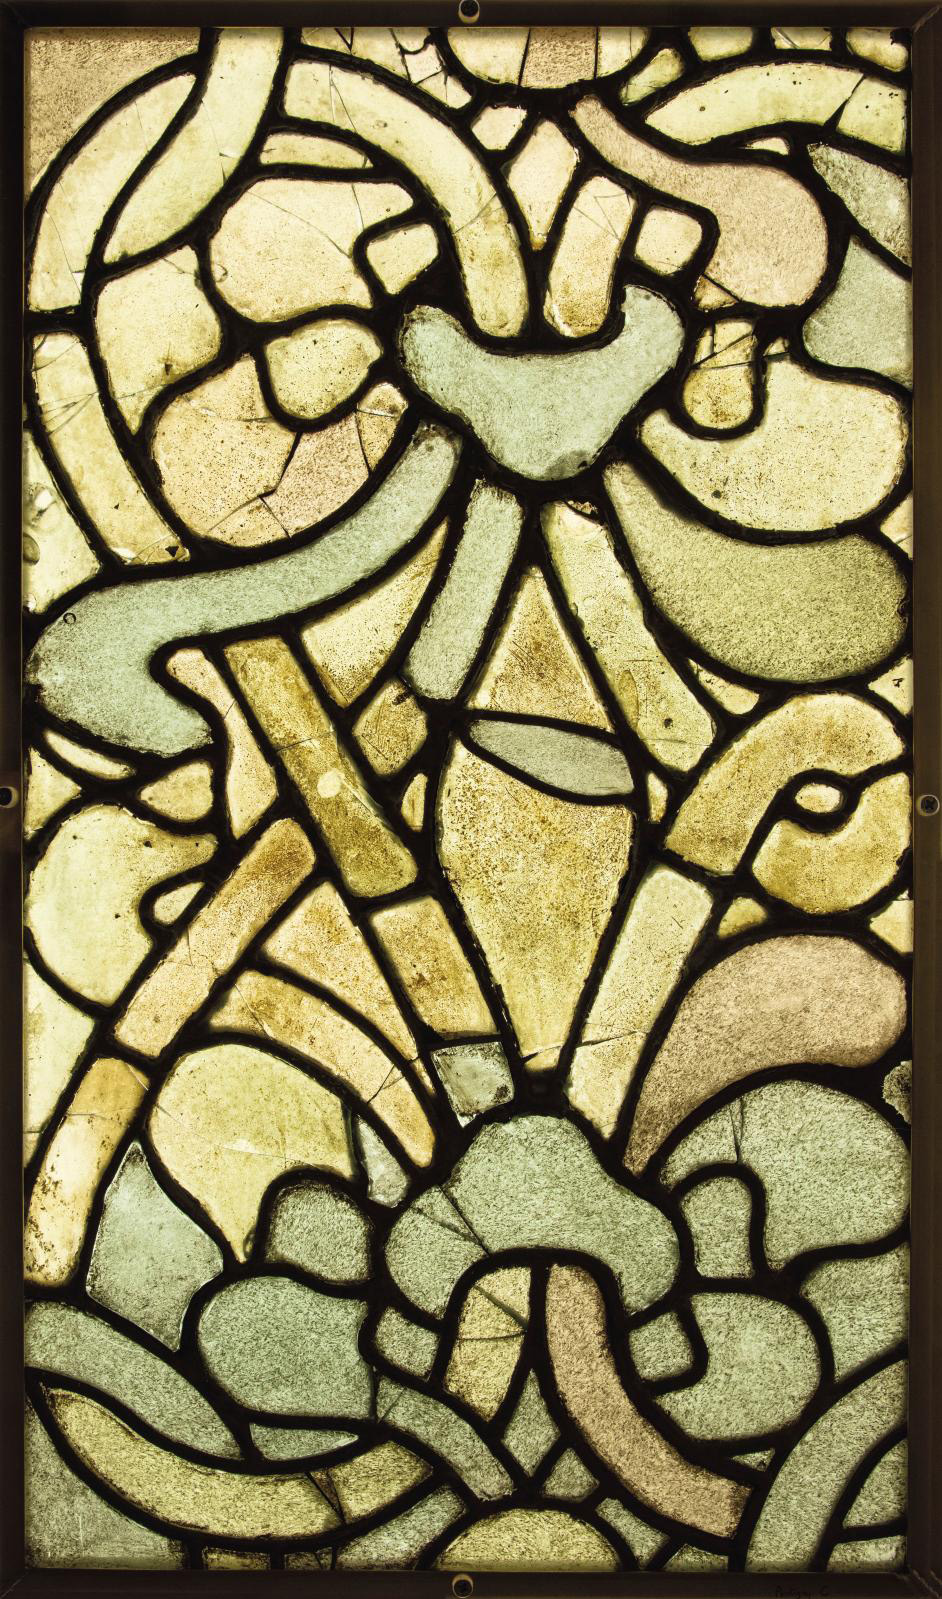 Cistercian panel from Pontigny Abbey (Yonne, detail), early 13th century, glass and lead, 63.6 x 37.8 cm/25 x 14.9 in, DRAC Bourgogne-Fran